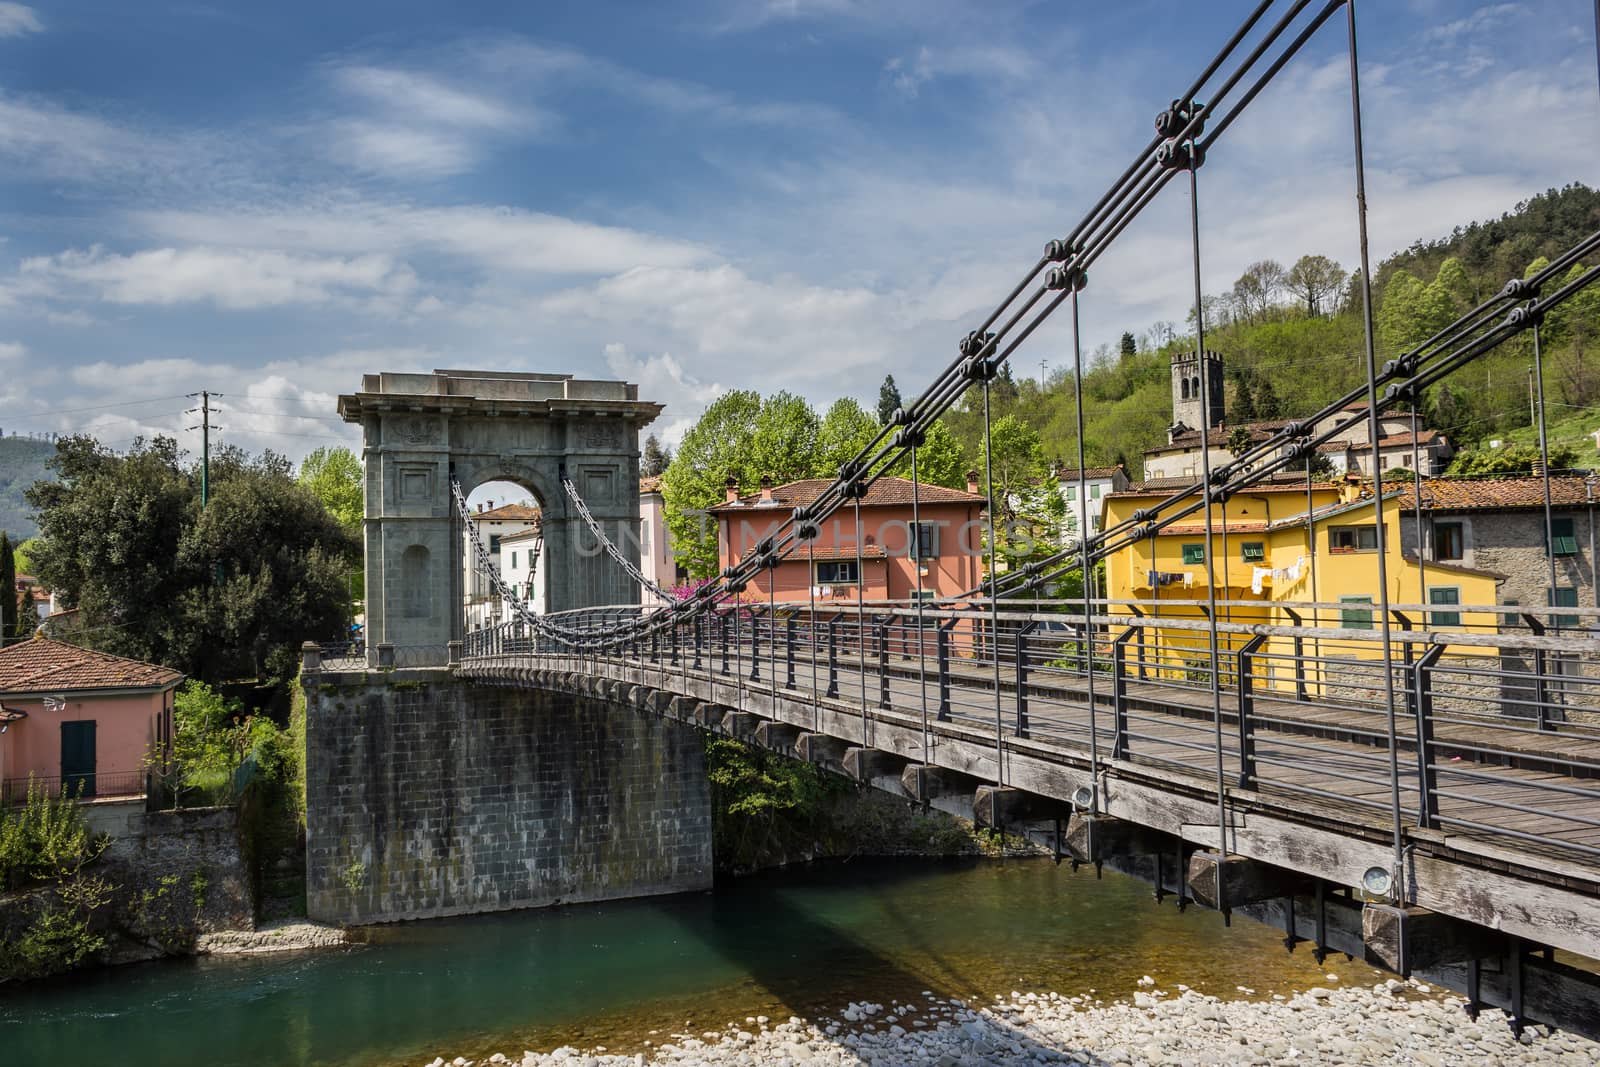 The bridge was designed by engineer Lorenzo Stands in 1840 is one of the first suspension bridges in Italy